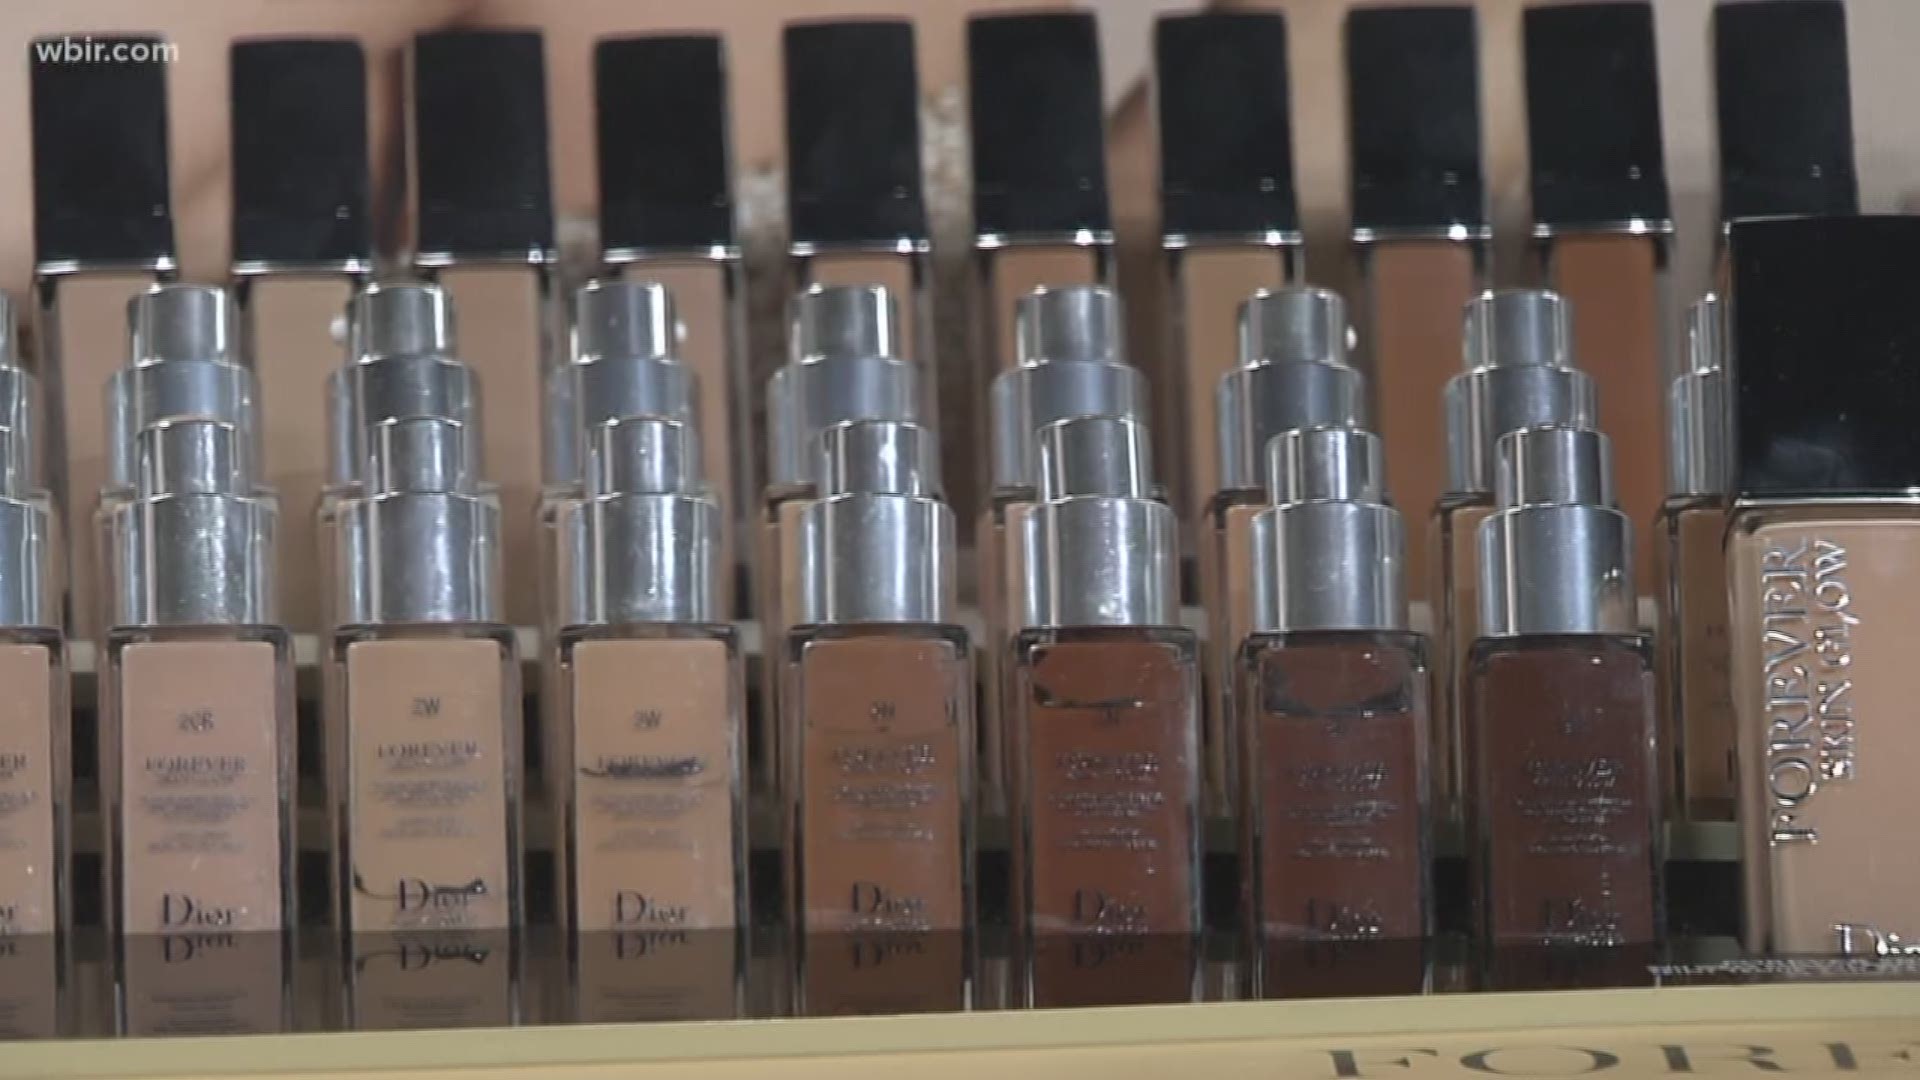 Makeup artist Jeremy Wise shows us how to find the right foundation and concealer.